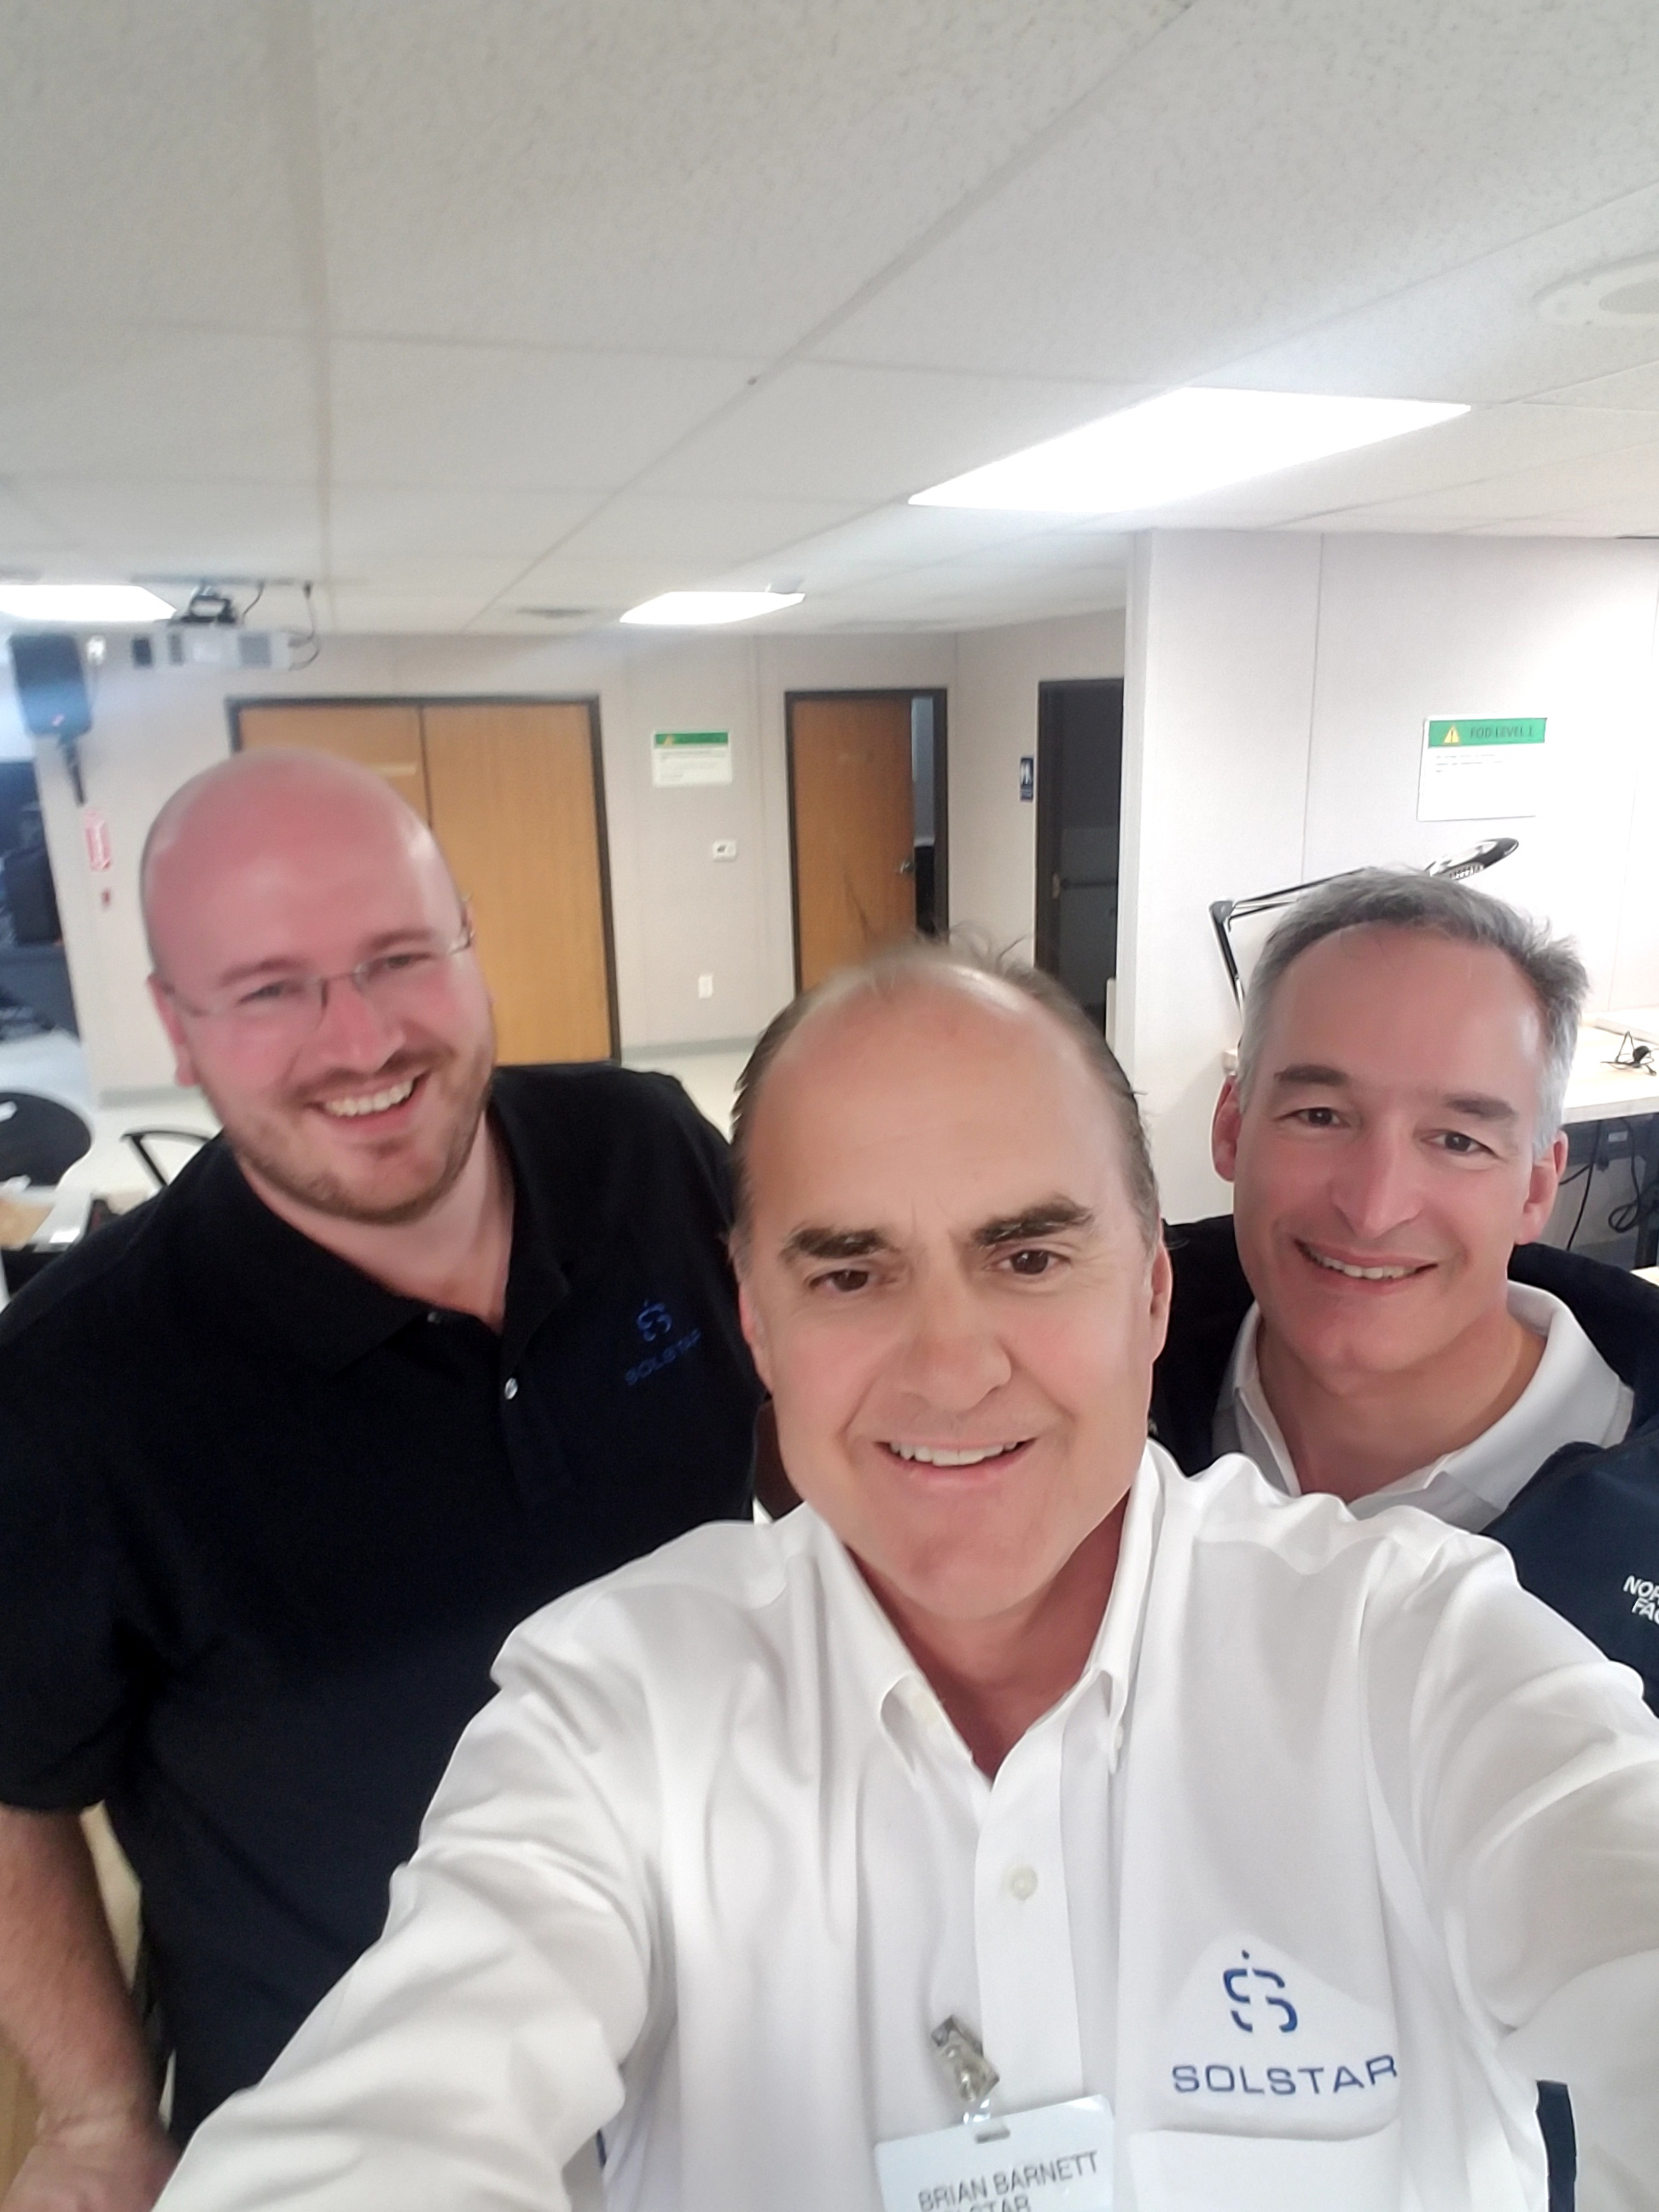 Solstar team consisted of M. Brian Barnett, CEO, in the middle; Mark Matossian, COO, on the right; and Charlie Whetel, senior pr